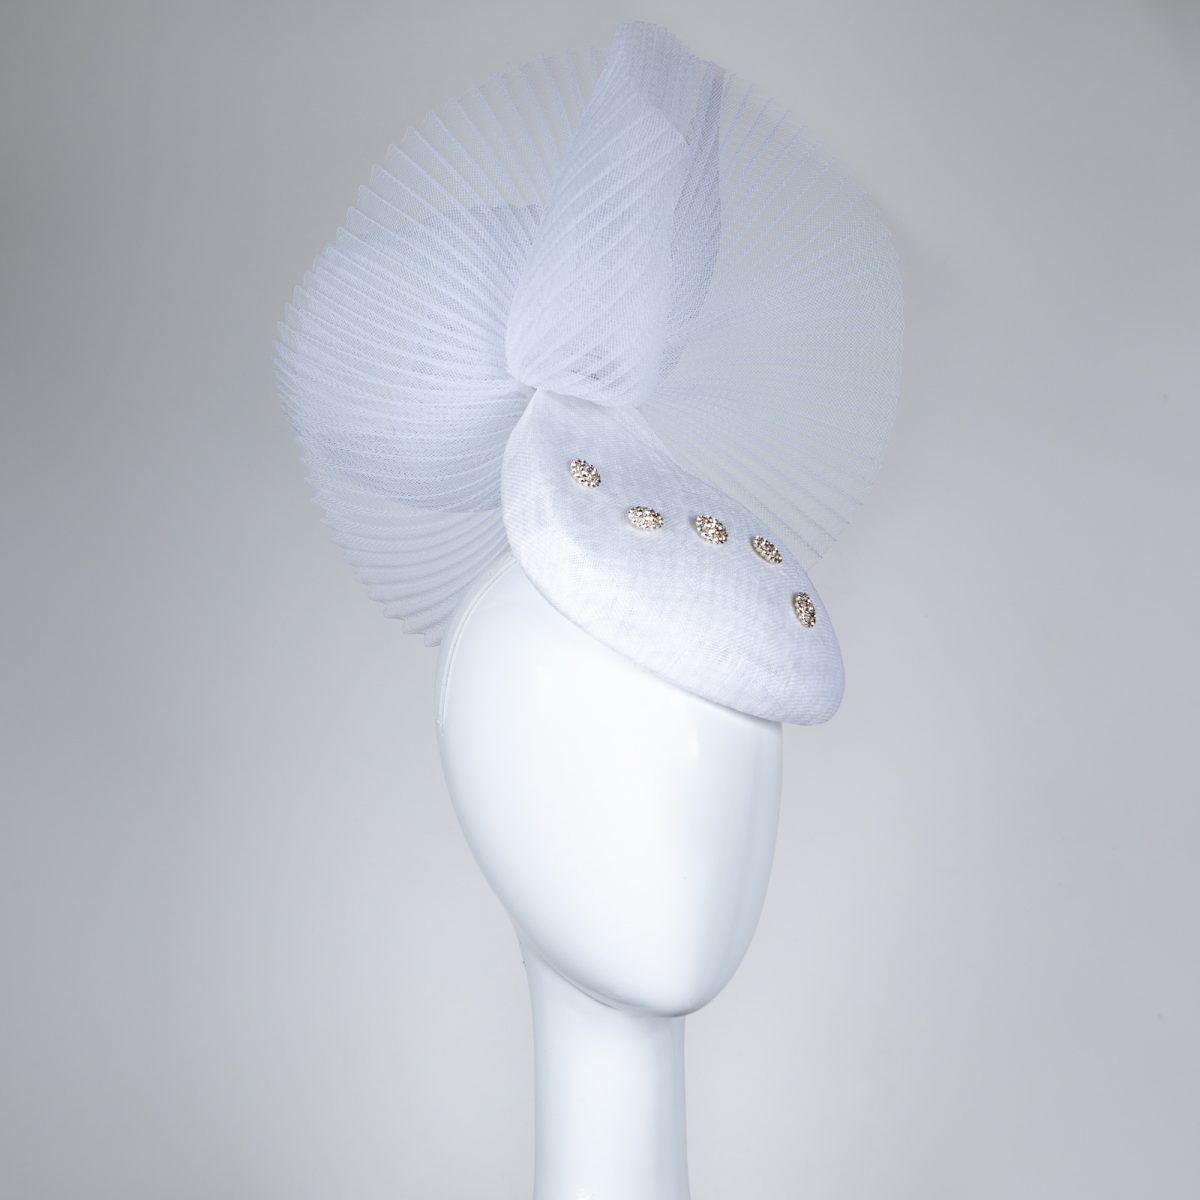 Belle - white classic hat